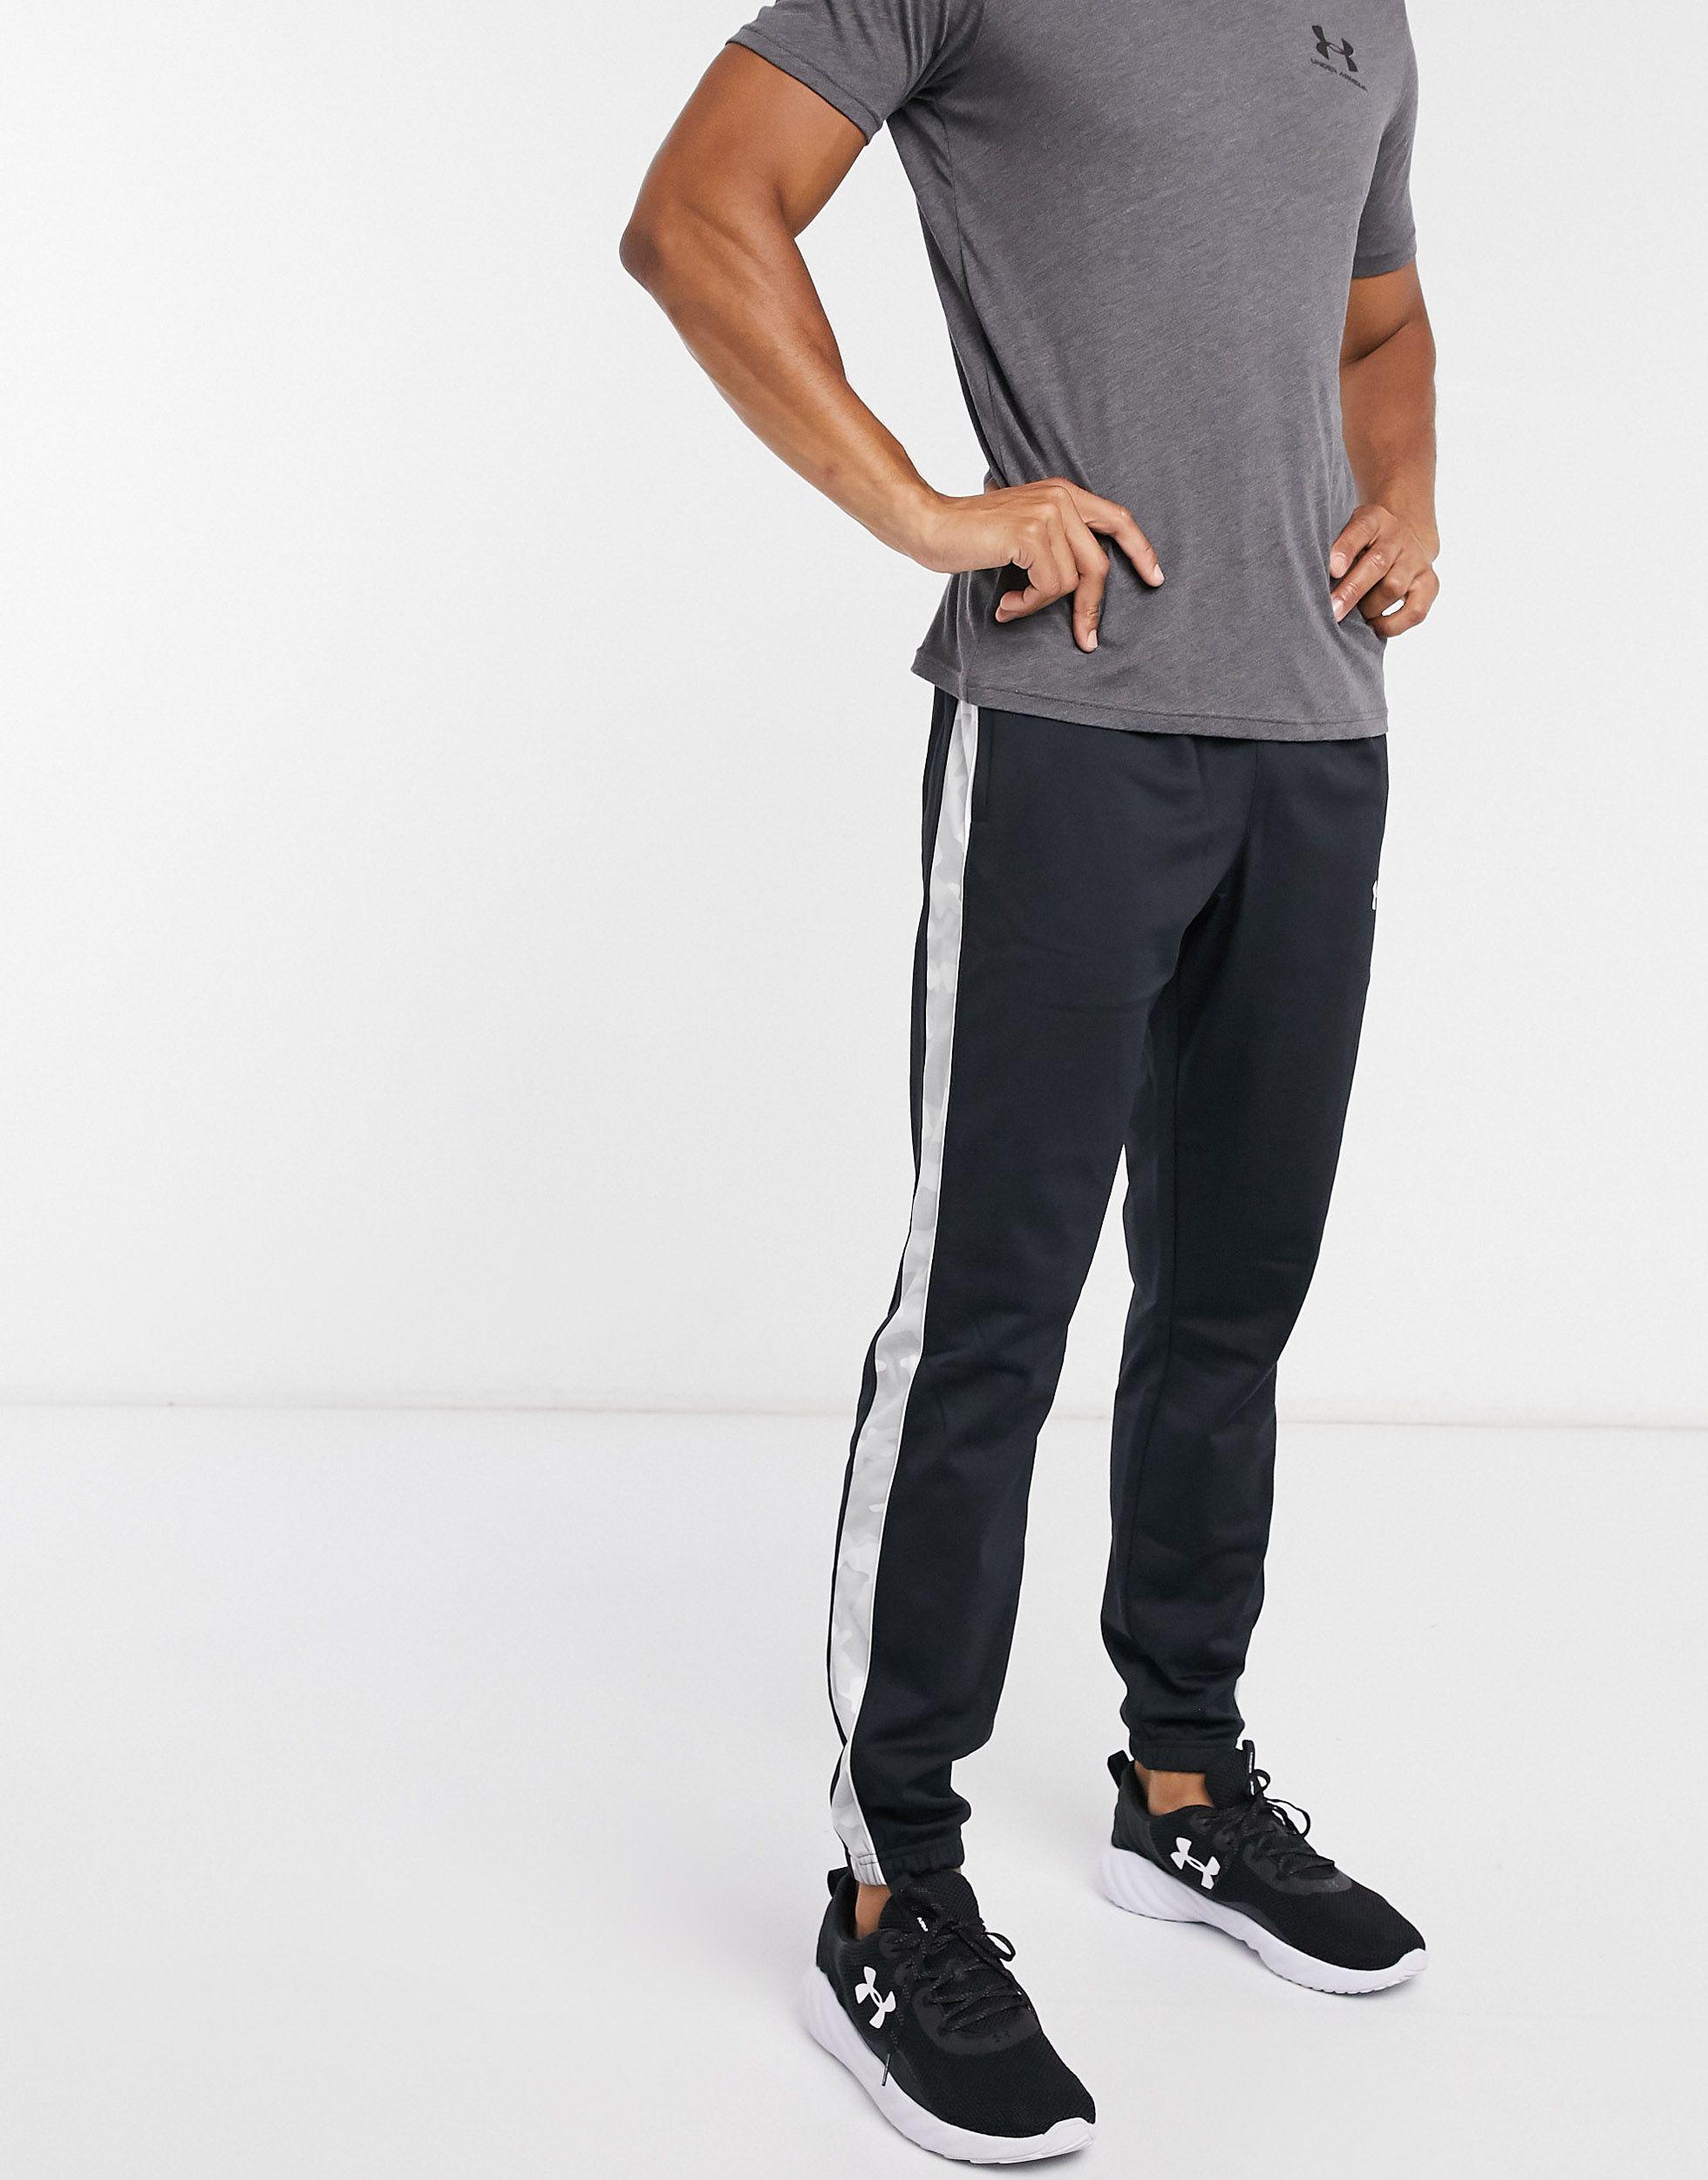 Under Armour Sportstyle Track Pants With Camo Side Stripe in Black